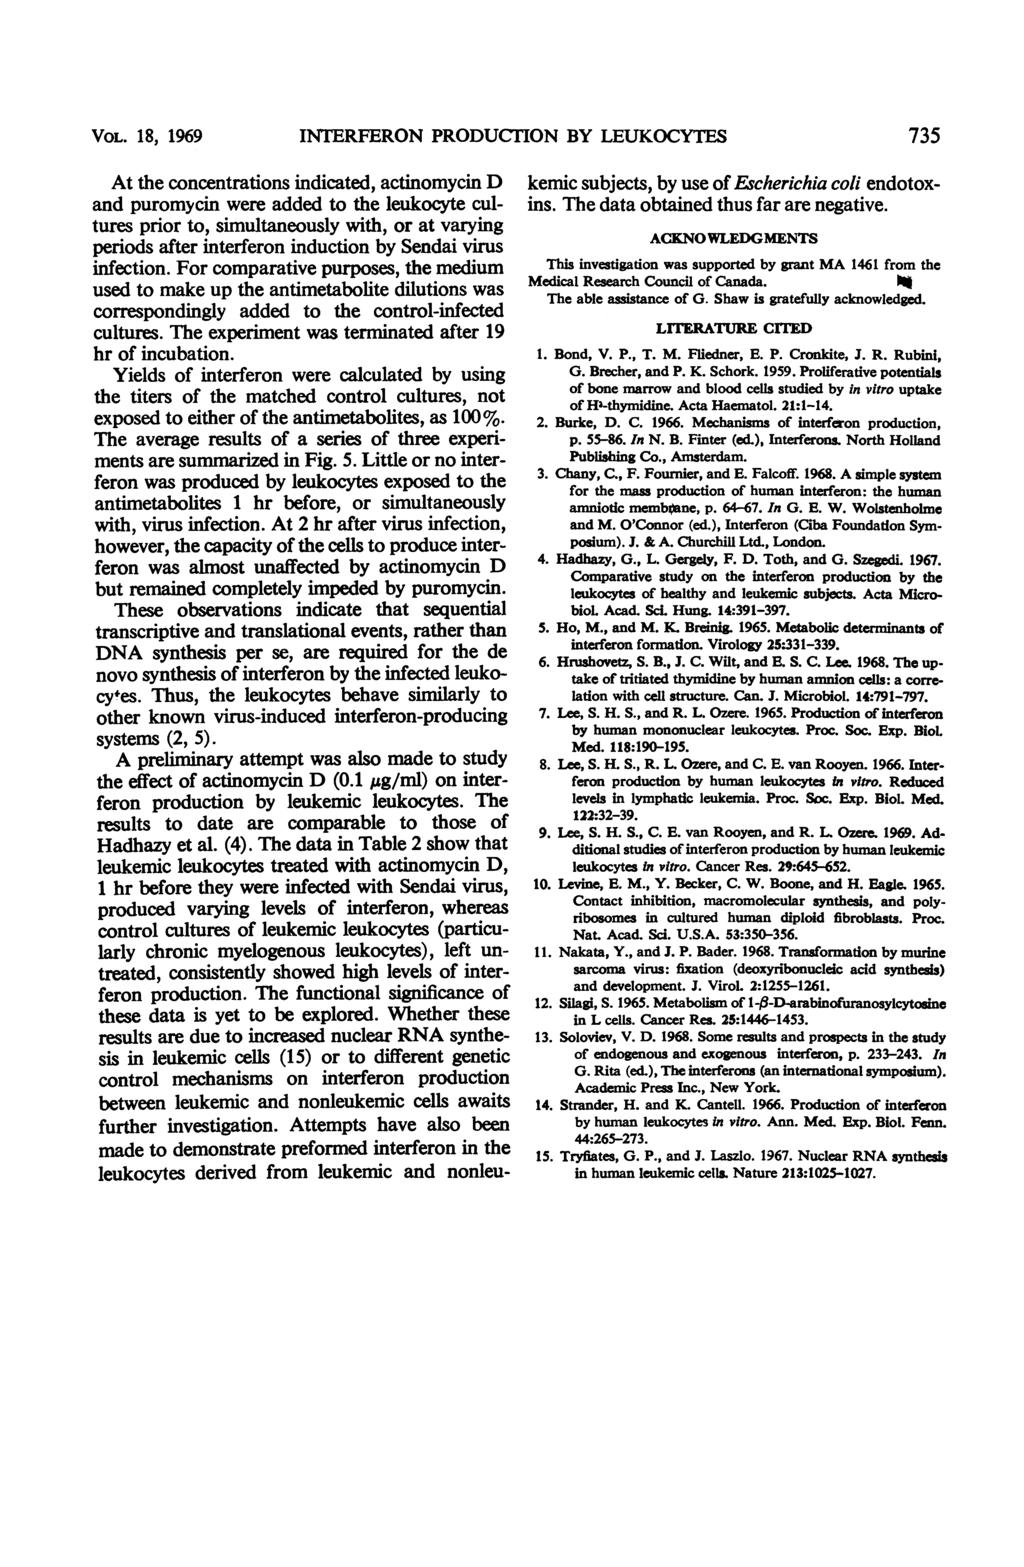 VOL. 18, 1969 INTERFERON PRODCTION BY LEKOCYTES At the concentrations indicated, actinomycin D and puromycin were added to the leukocyte cultures prior to, simultaneously with, or at varying periods